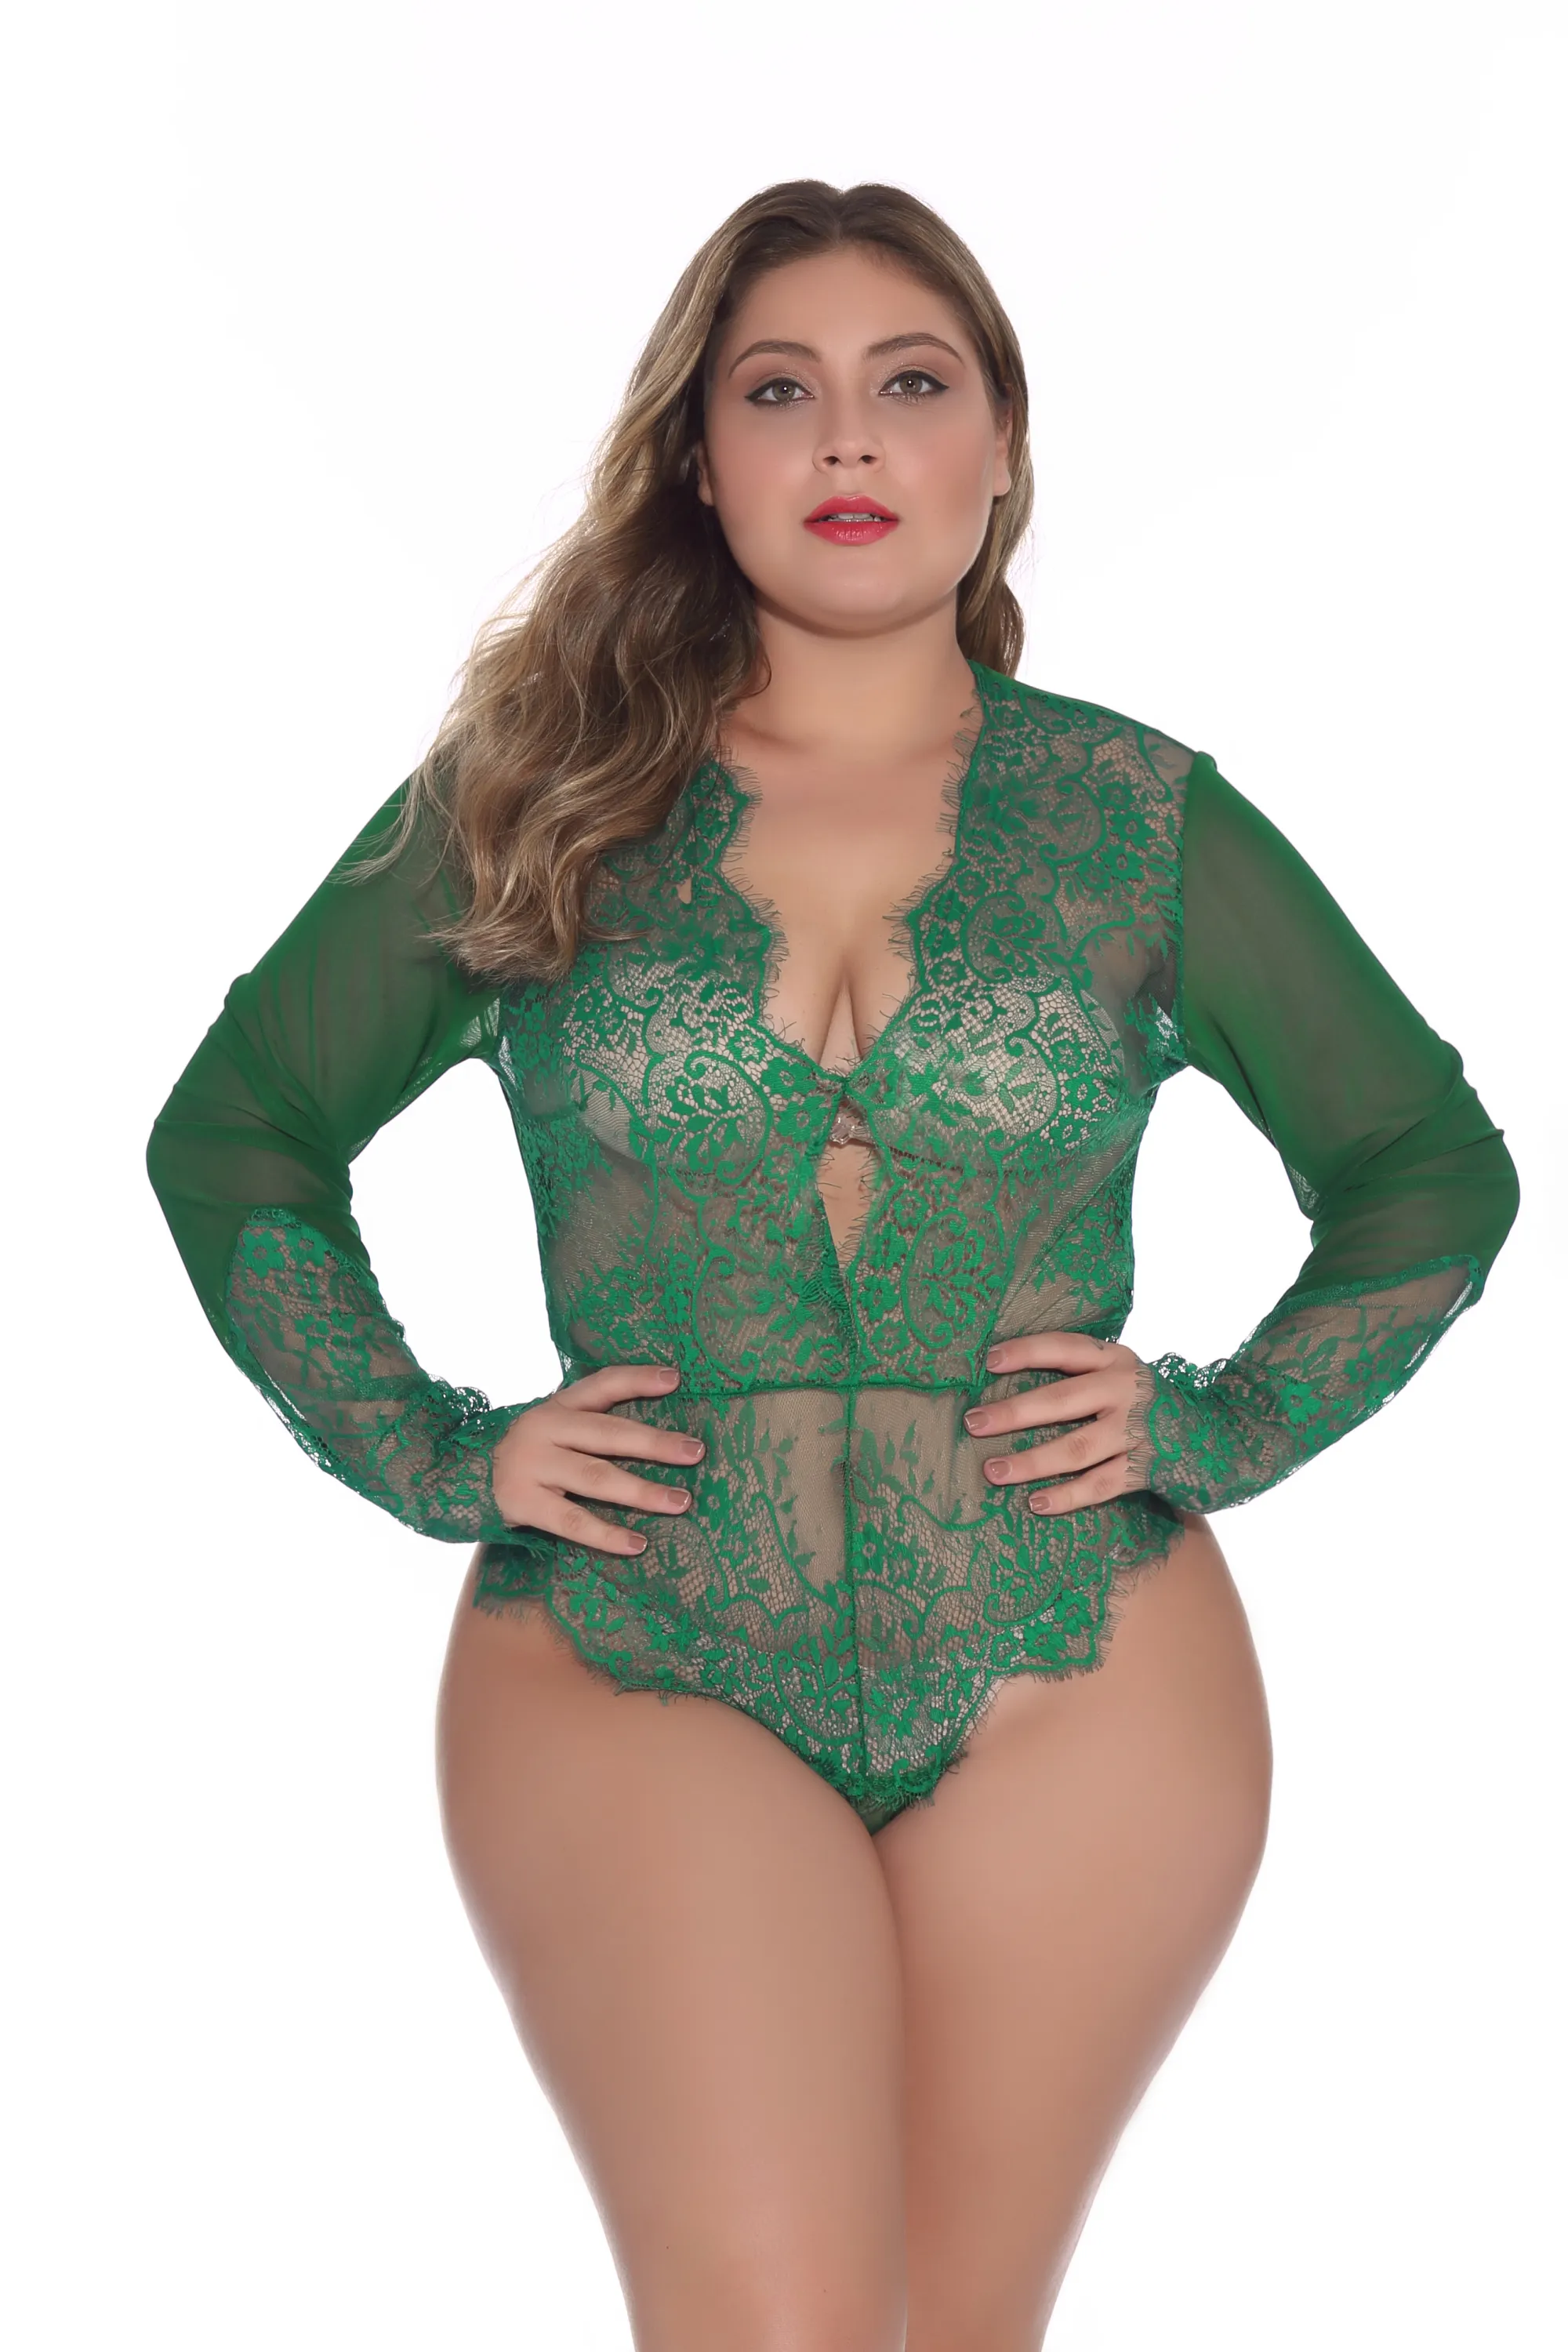 Wholesale Sexy Lingerie Breathable Lace Sexy Teddy Uniform SBT00005